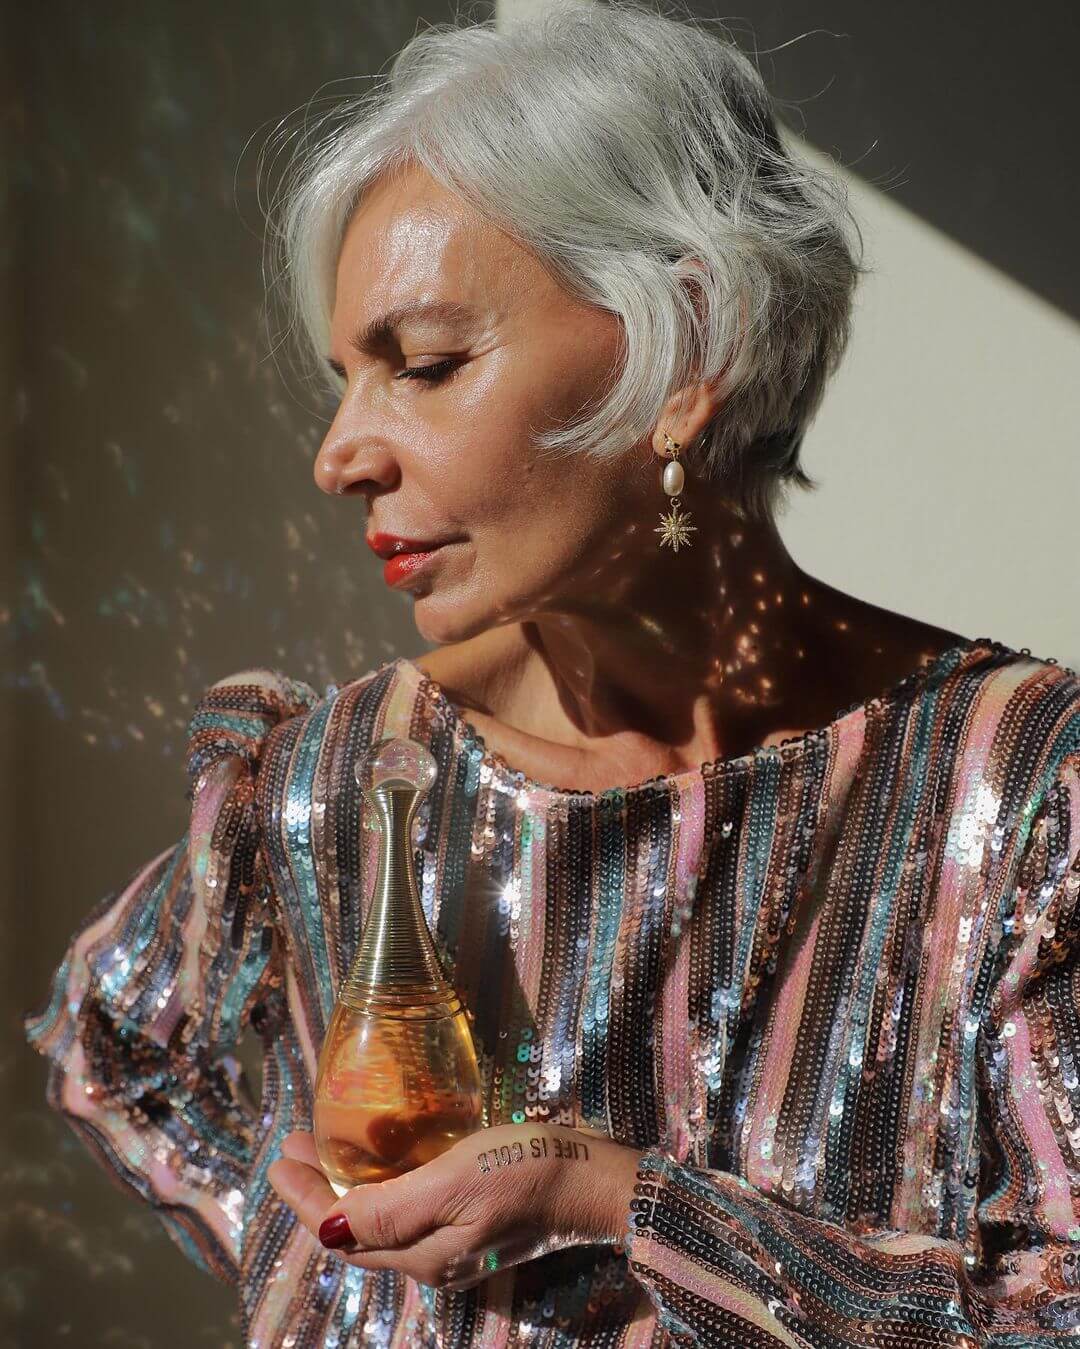 grece ghanem wearing a sequin top and holding a bottle of perfume